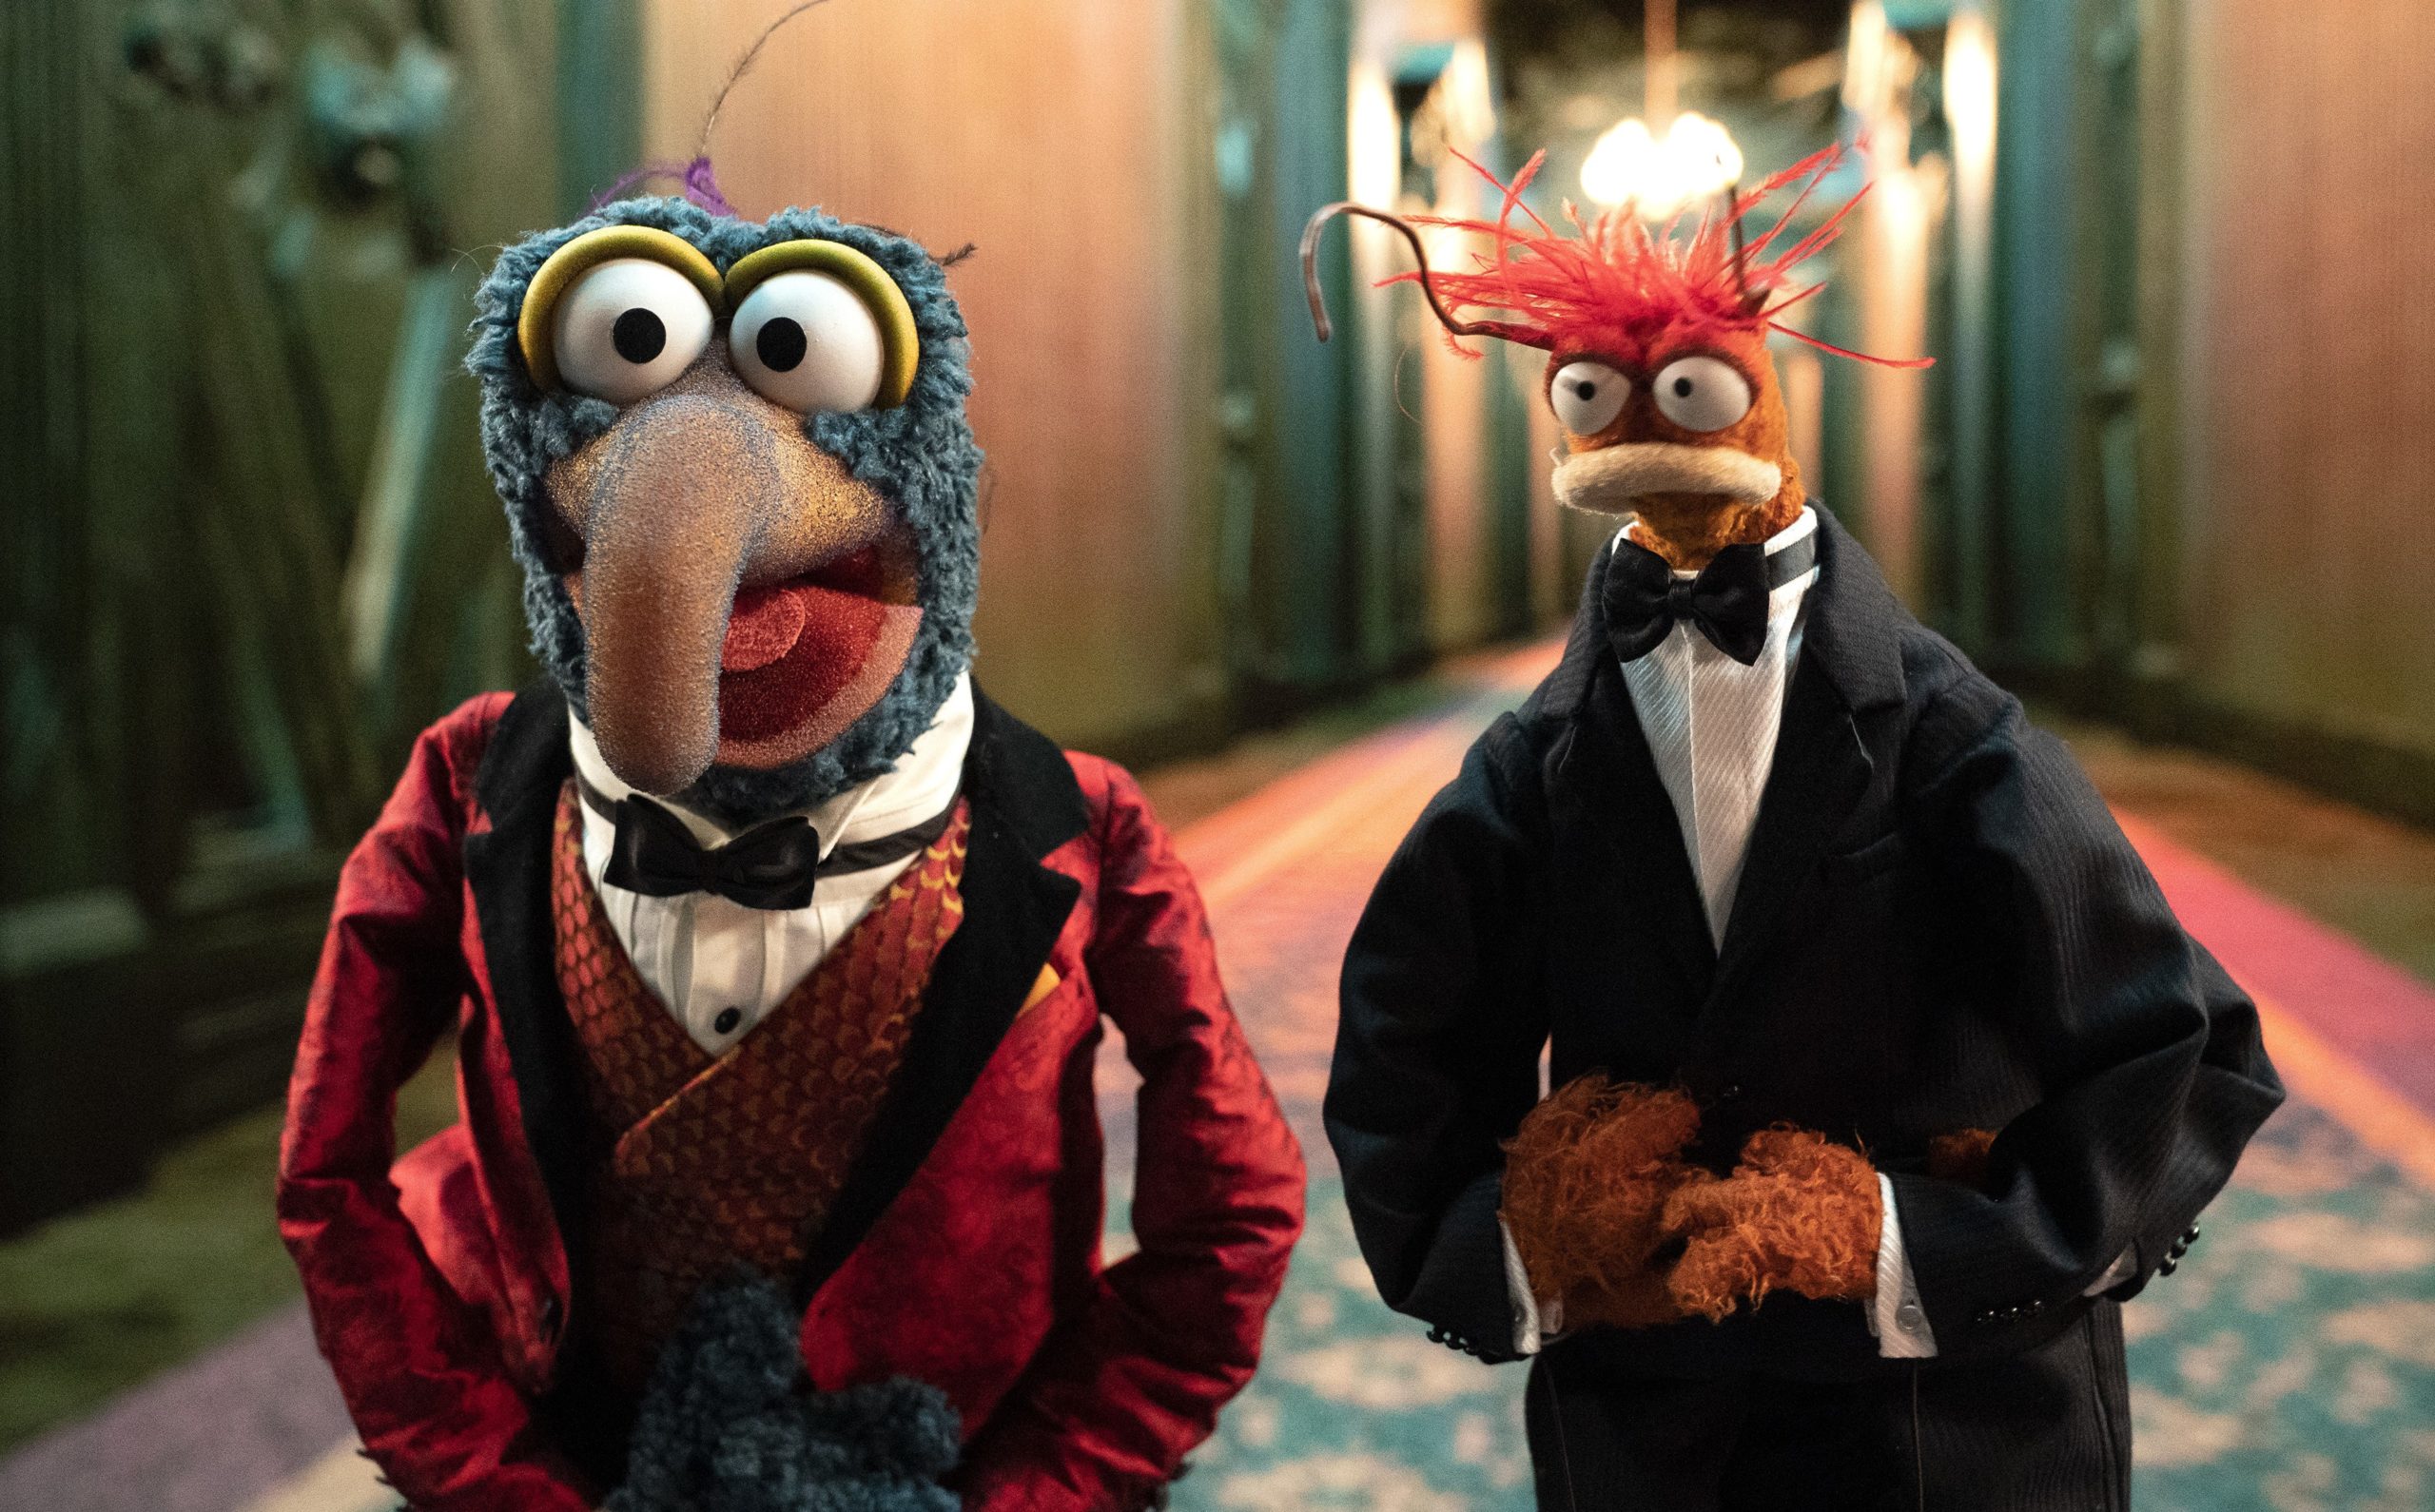 Muppets Haunted Mansion Ending Explained [SPOILER!]